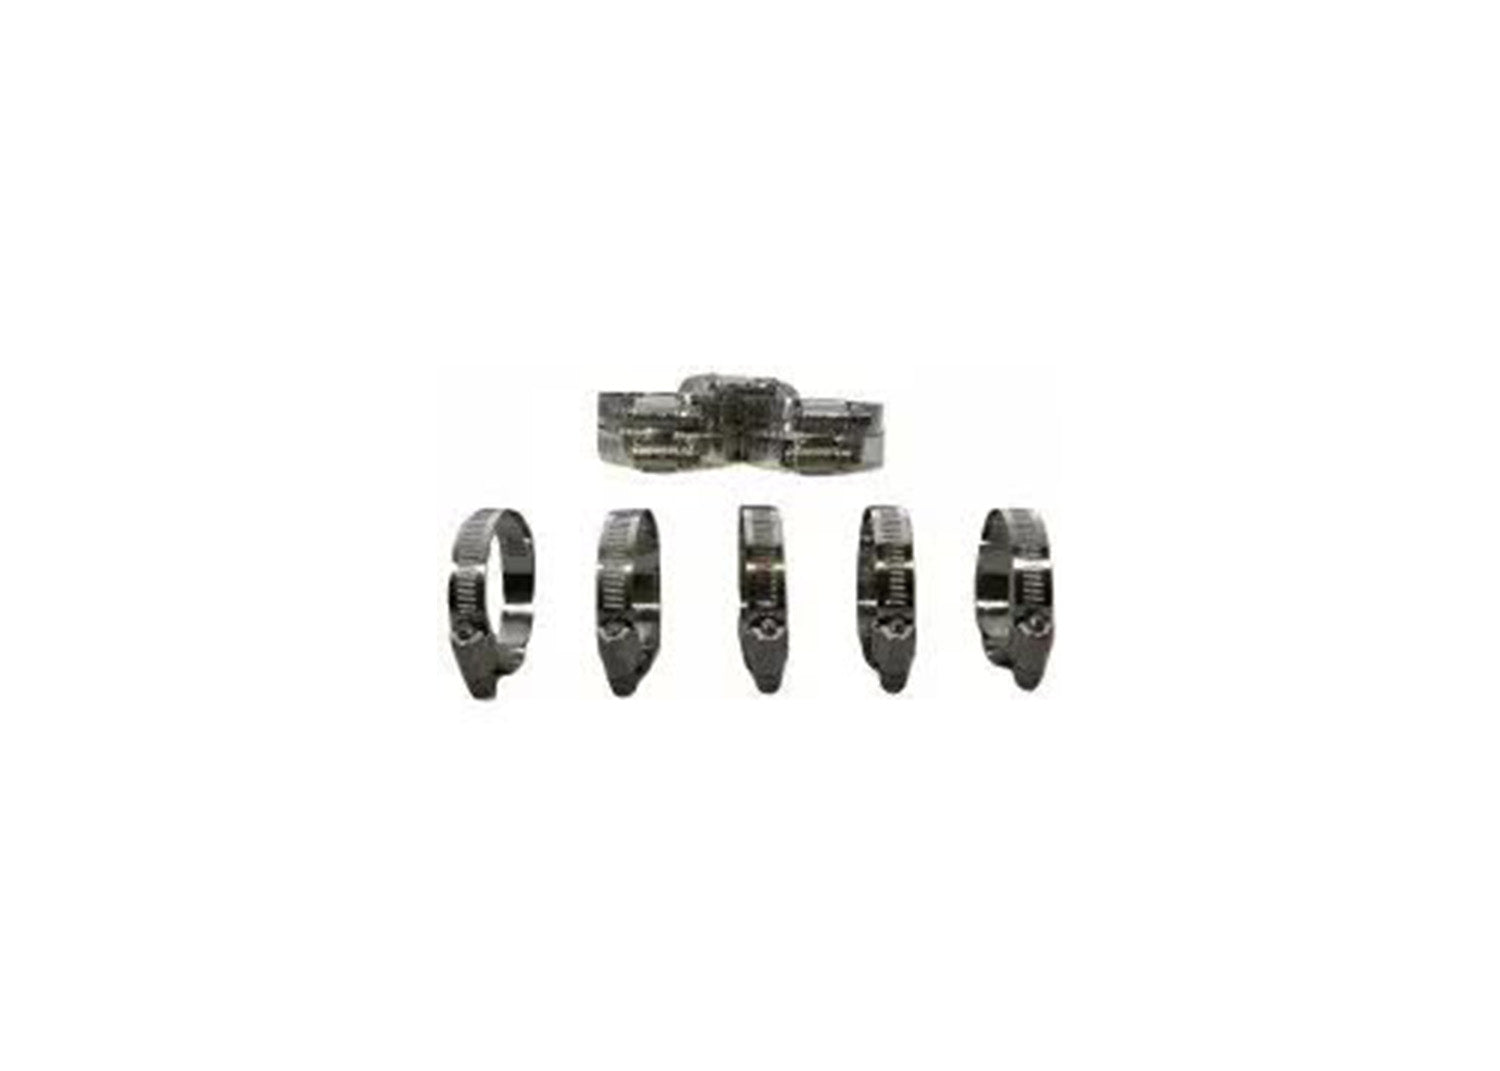 Worm Gear Clamps 0.25"-0.63" Clamping Range Part Number-222001